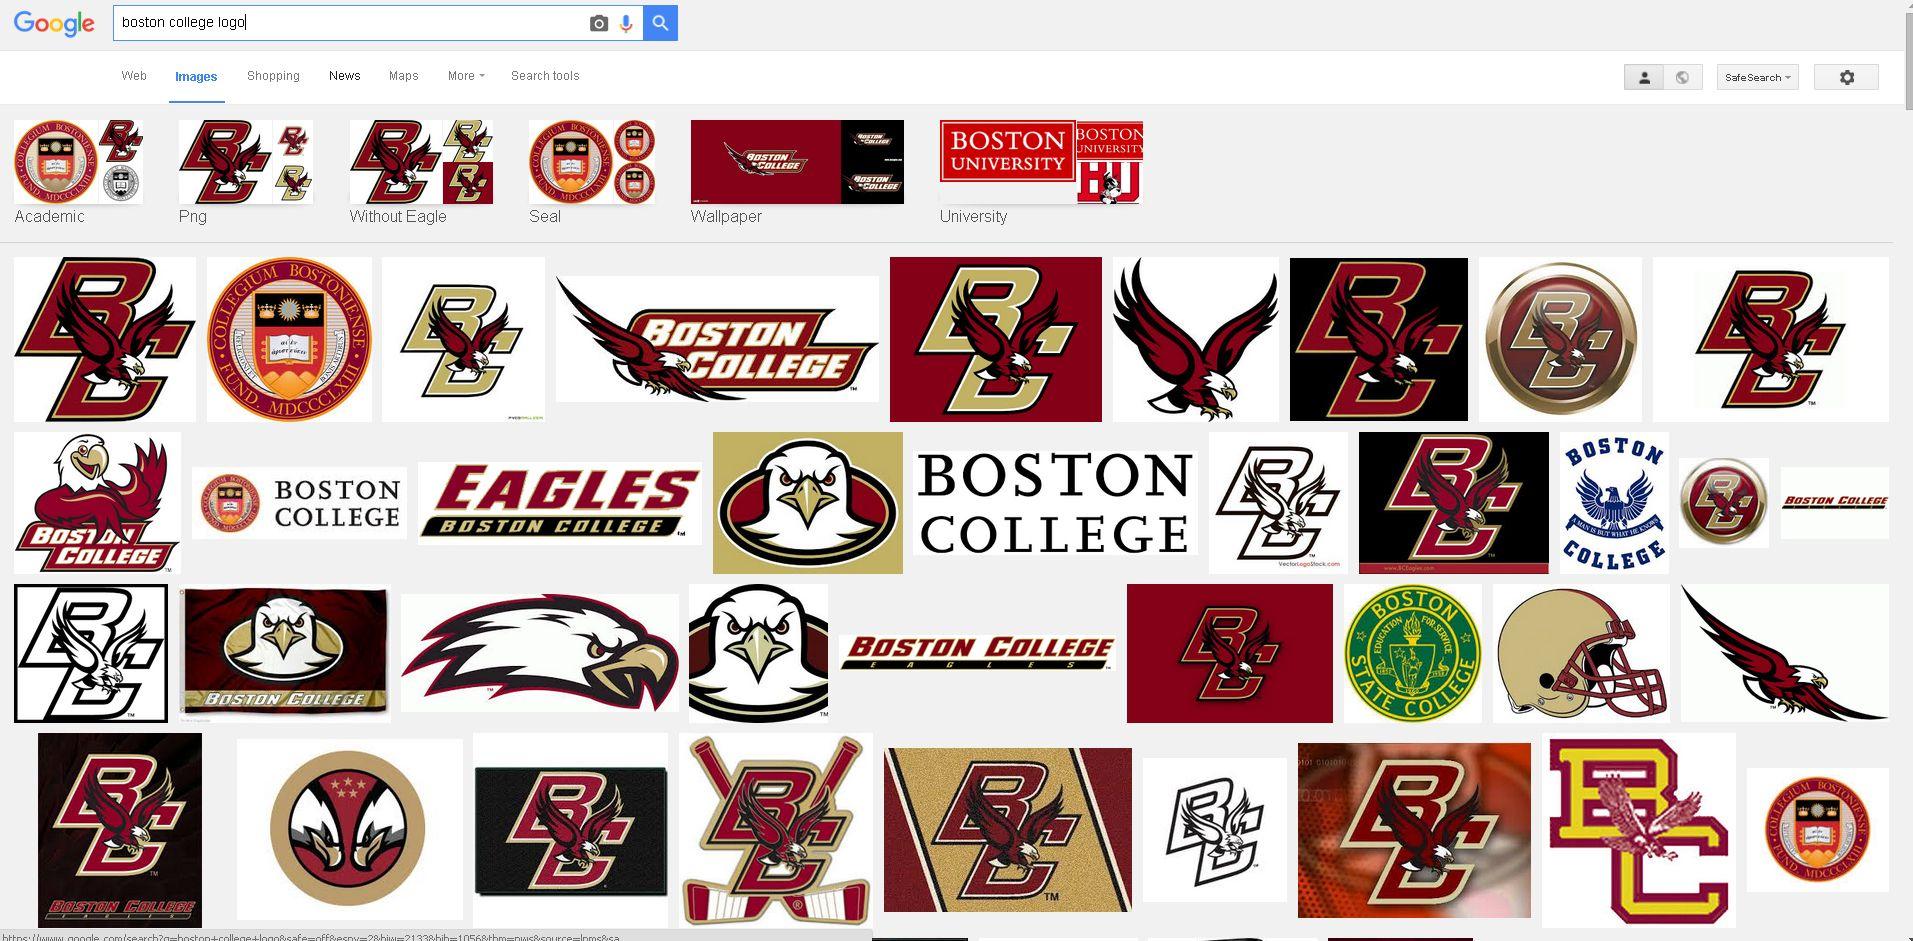 Boston College Logo - BC OR BC? | ISYS6621: Social Media and Digital Business